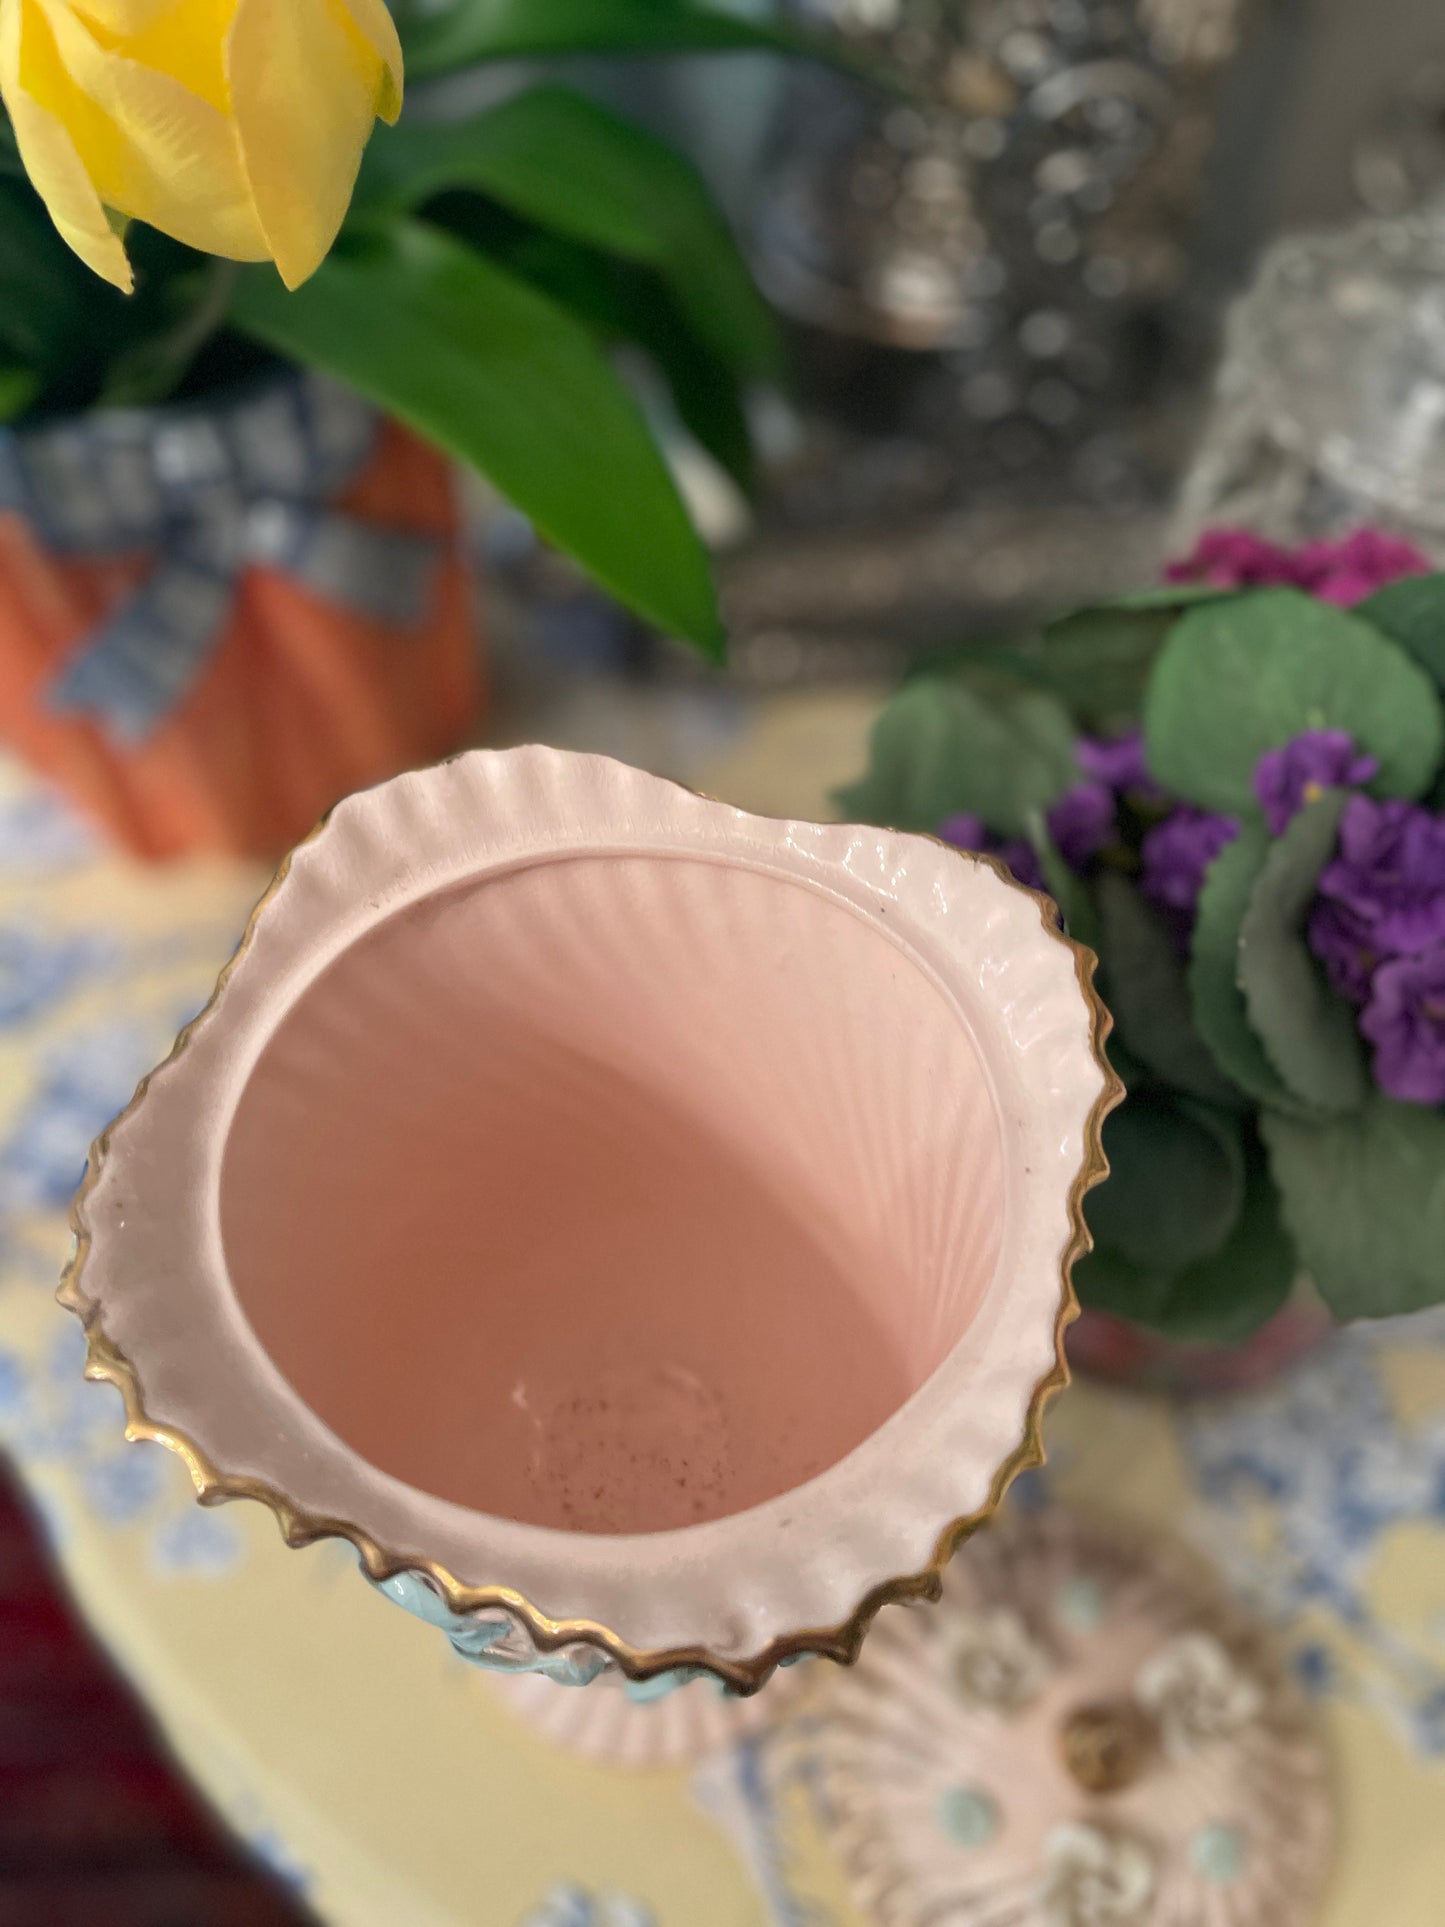 Wales Pedestal Lidded Pink Candy Dish with Applied Roses and Ribbon Lettering, Made in Japan